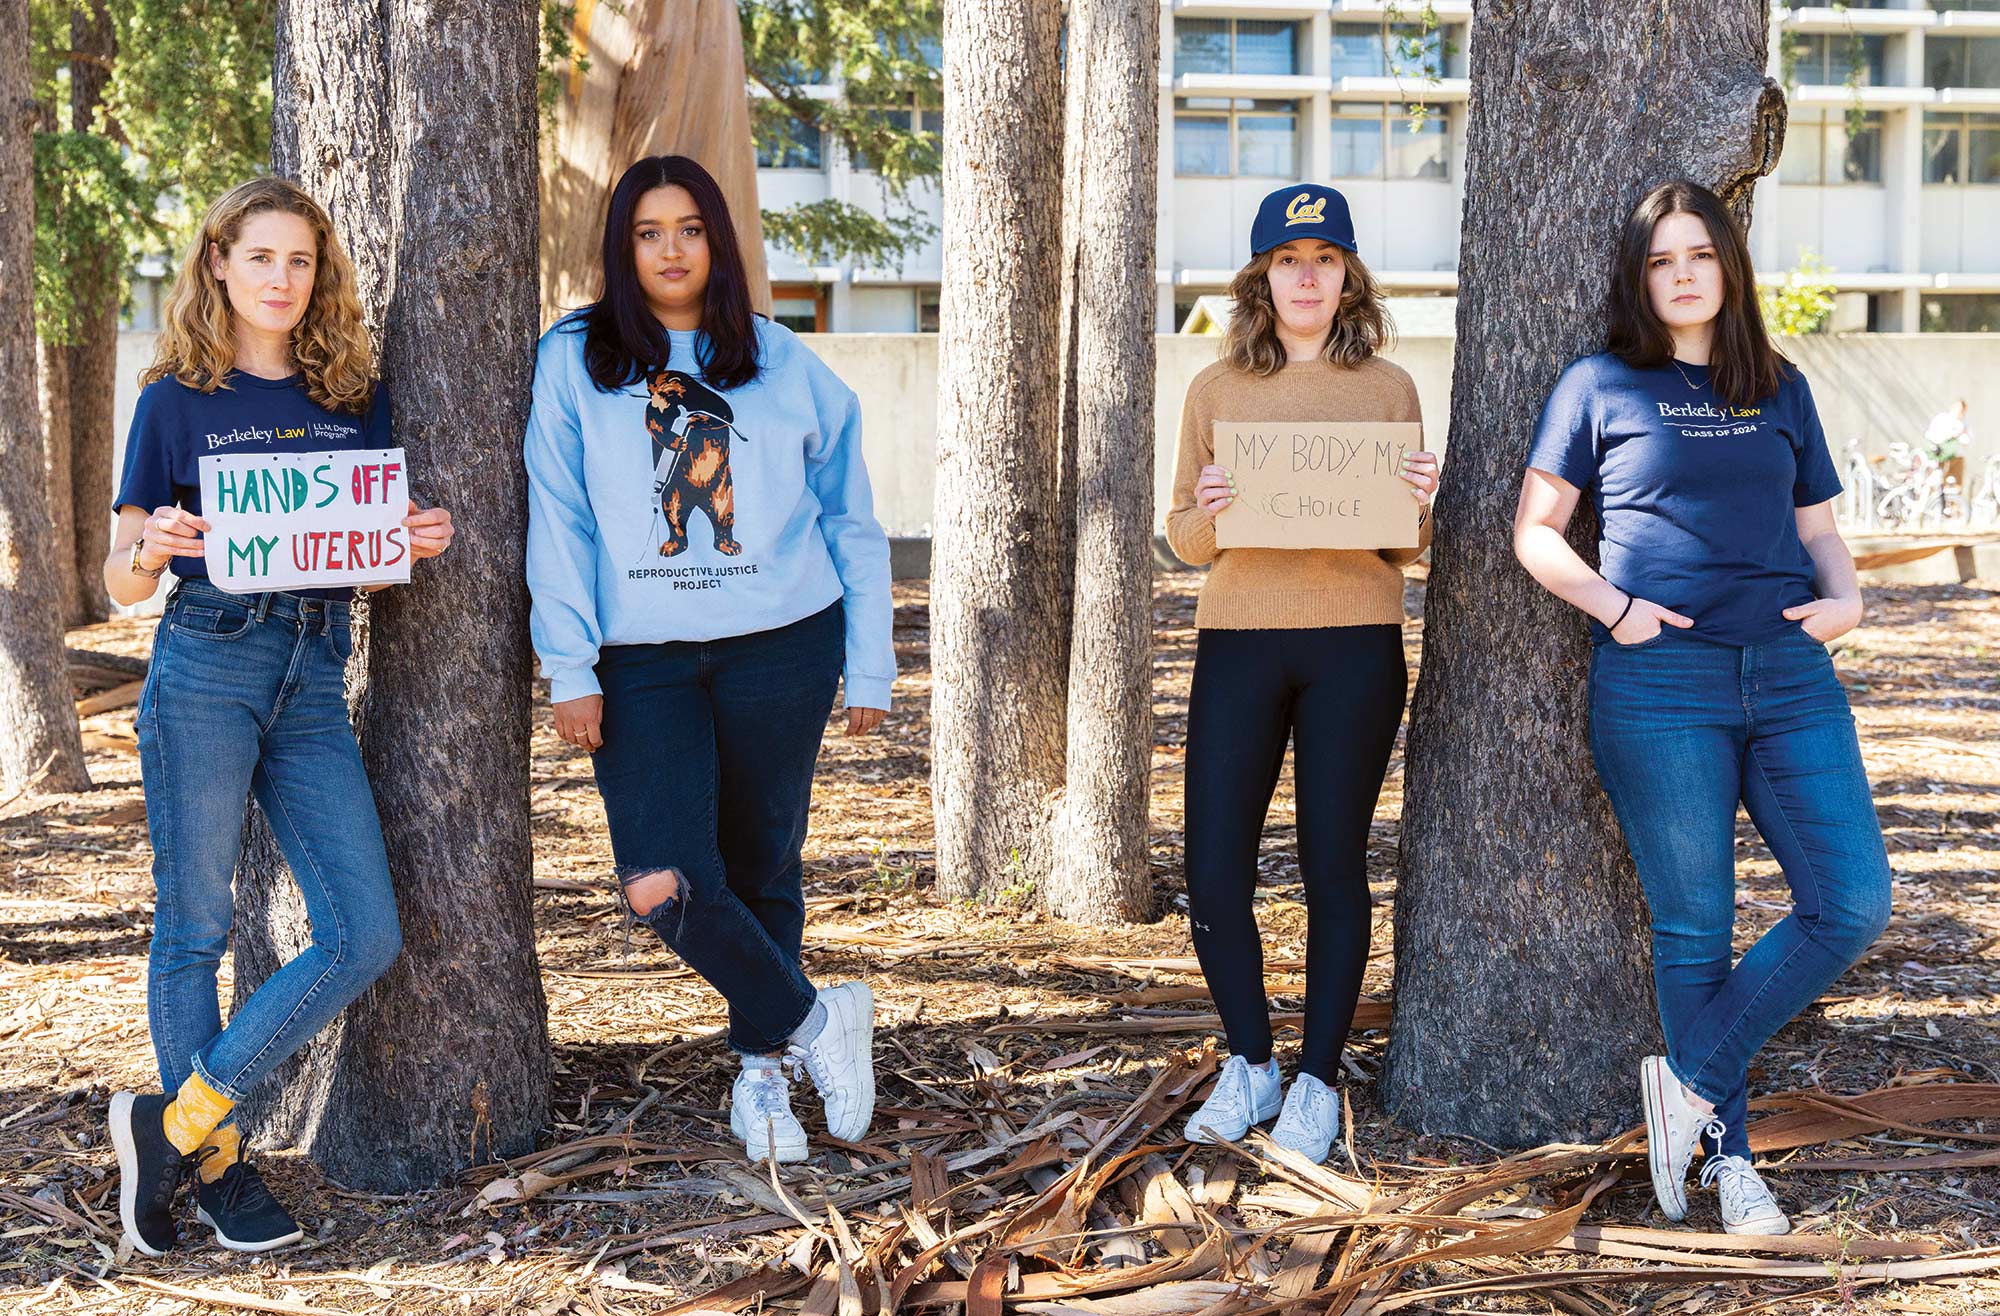 Florence Van Dyke, Jade Williams, Jacqueline Berkenstadt, and Camille Tabari standing with signs by trees